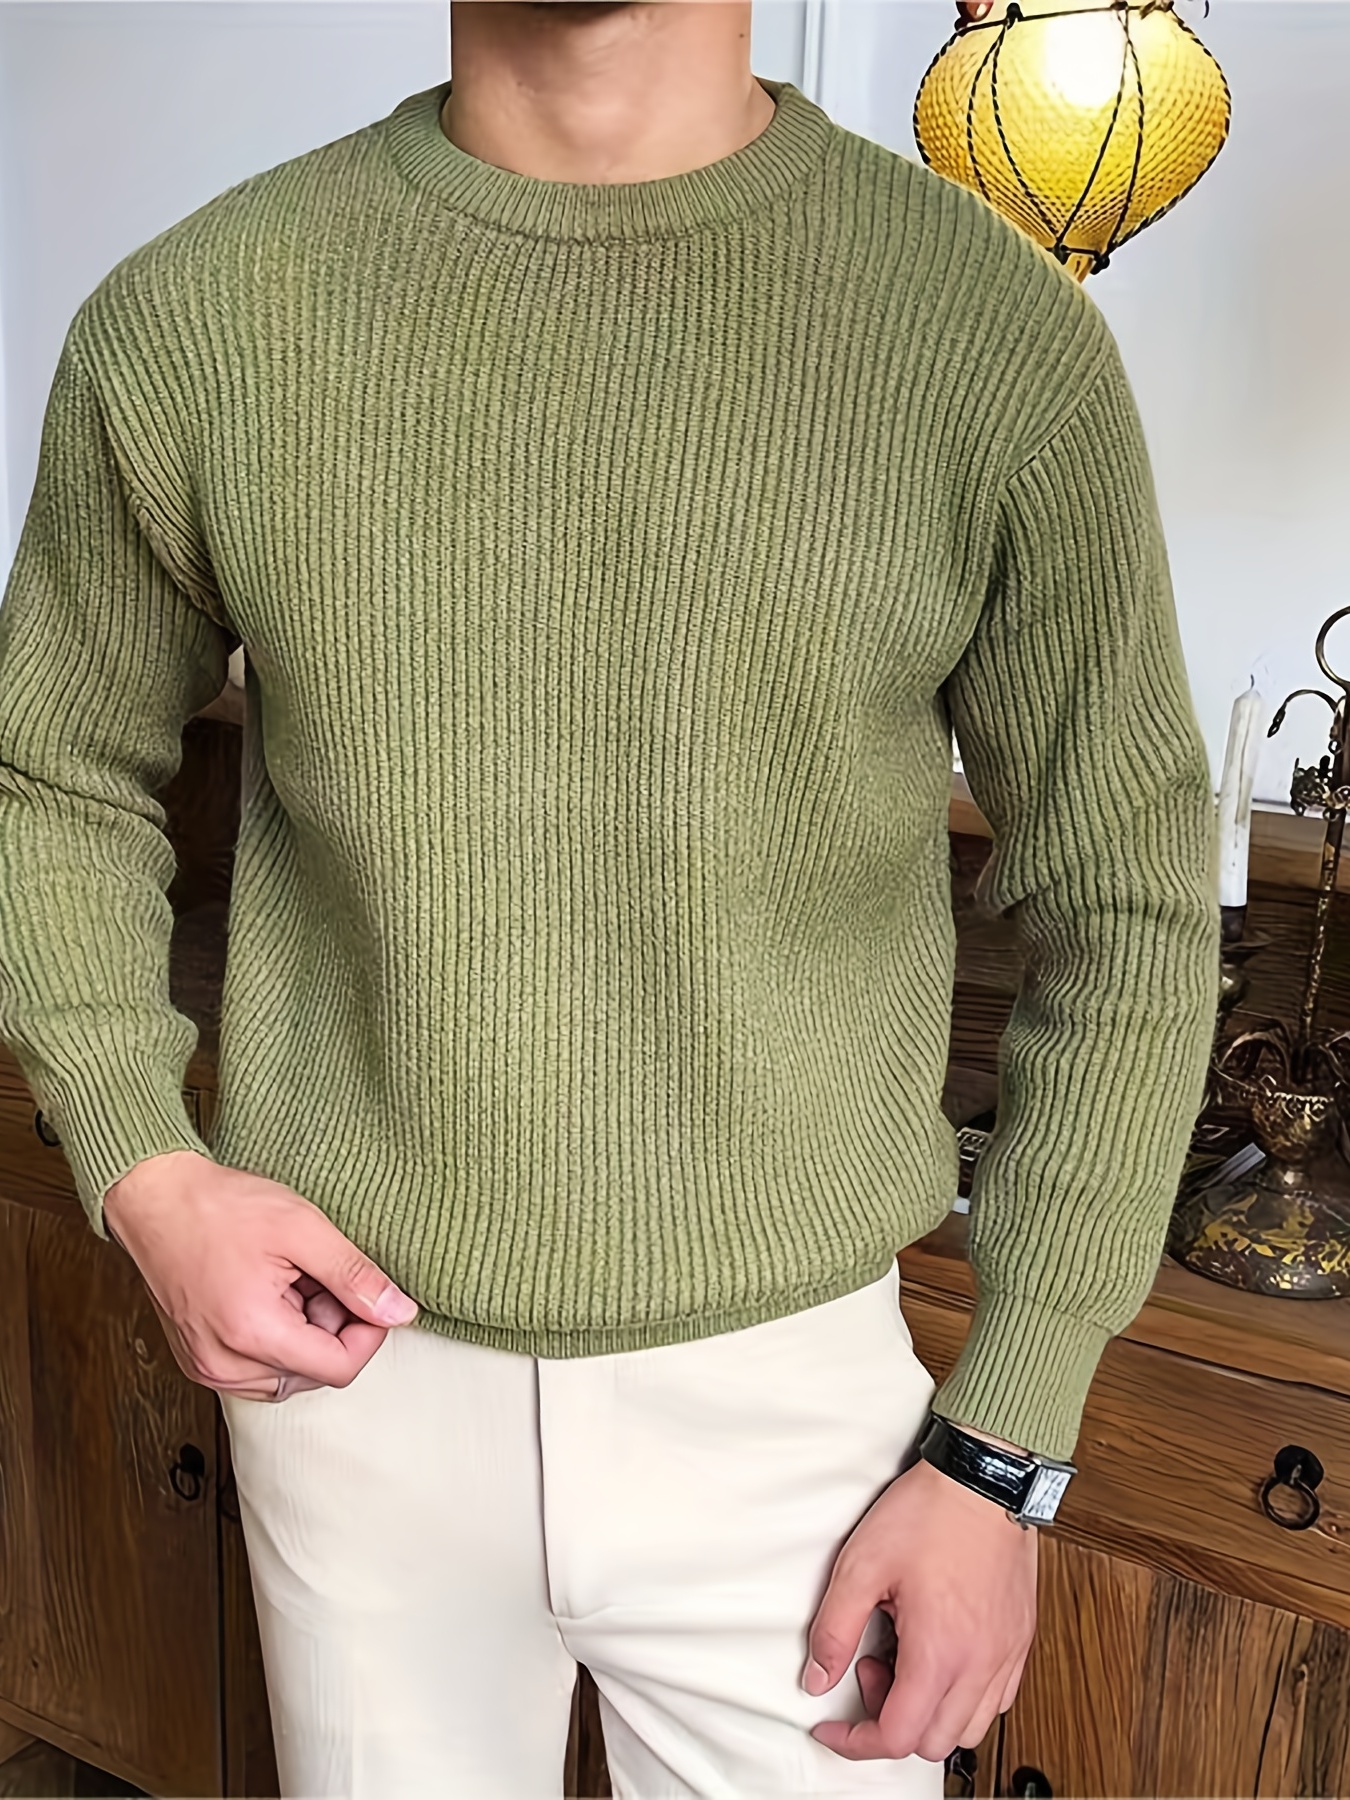 Shop Temu For Men's Sweaters - Free Returns Within 90 Days - Temu Canada